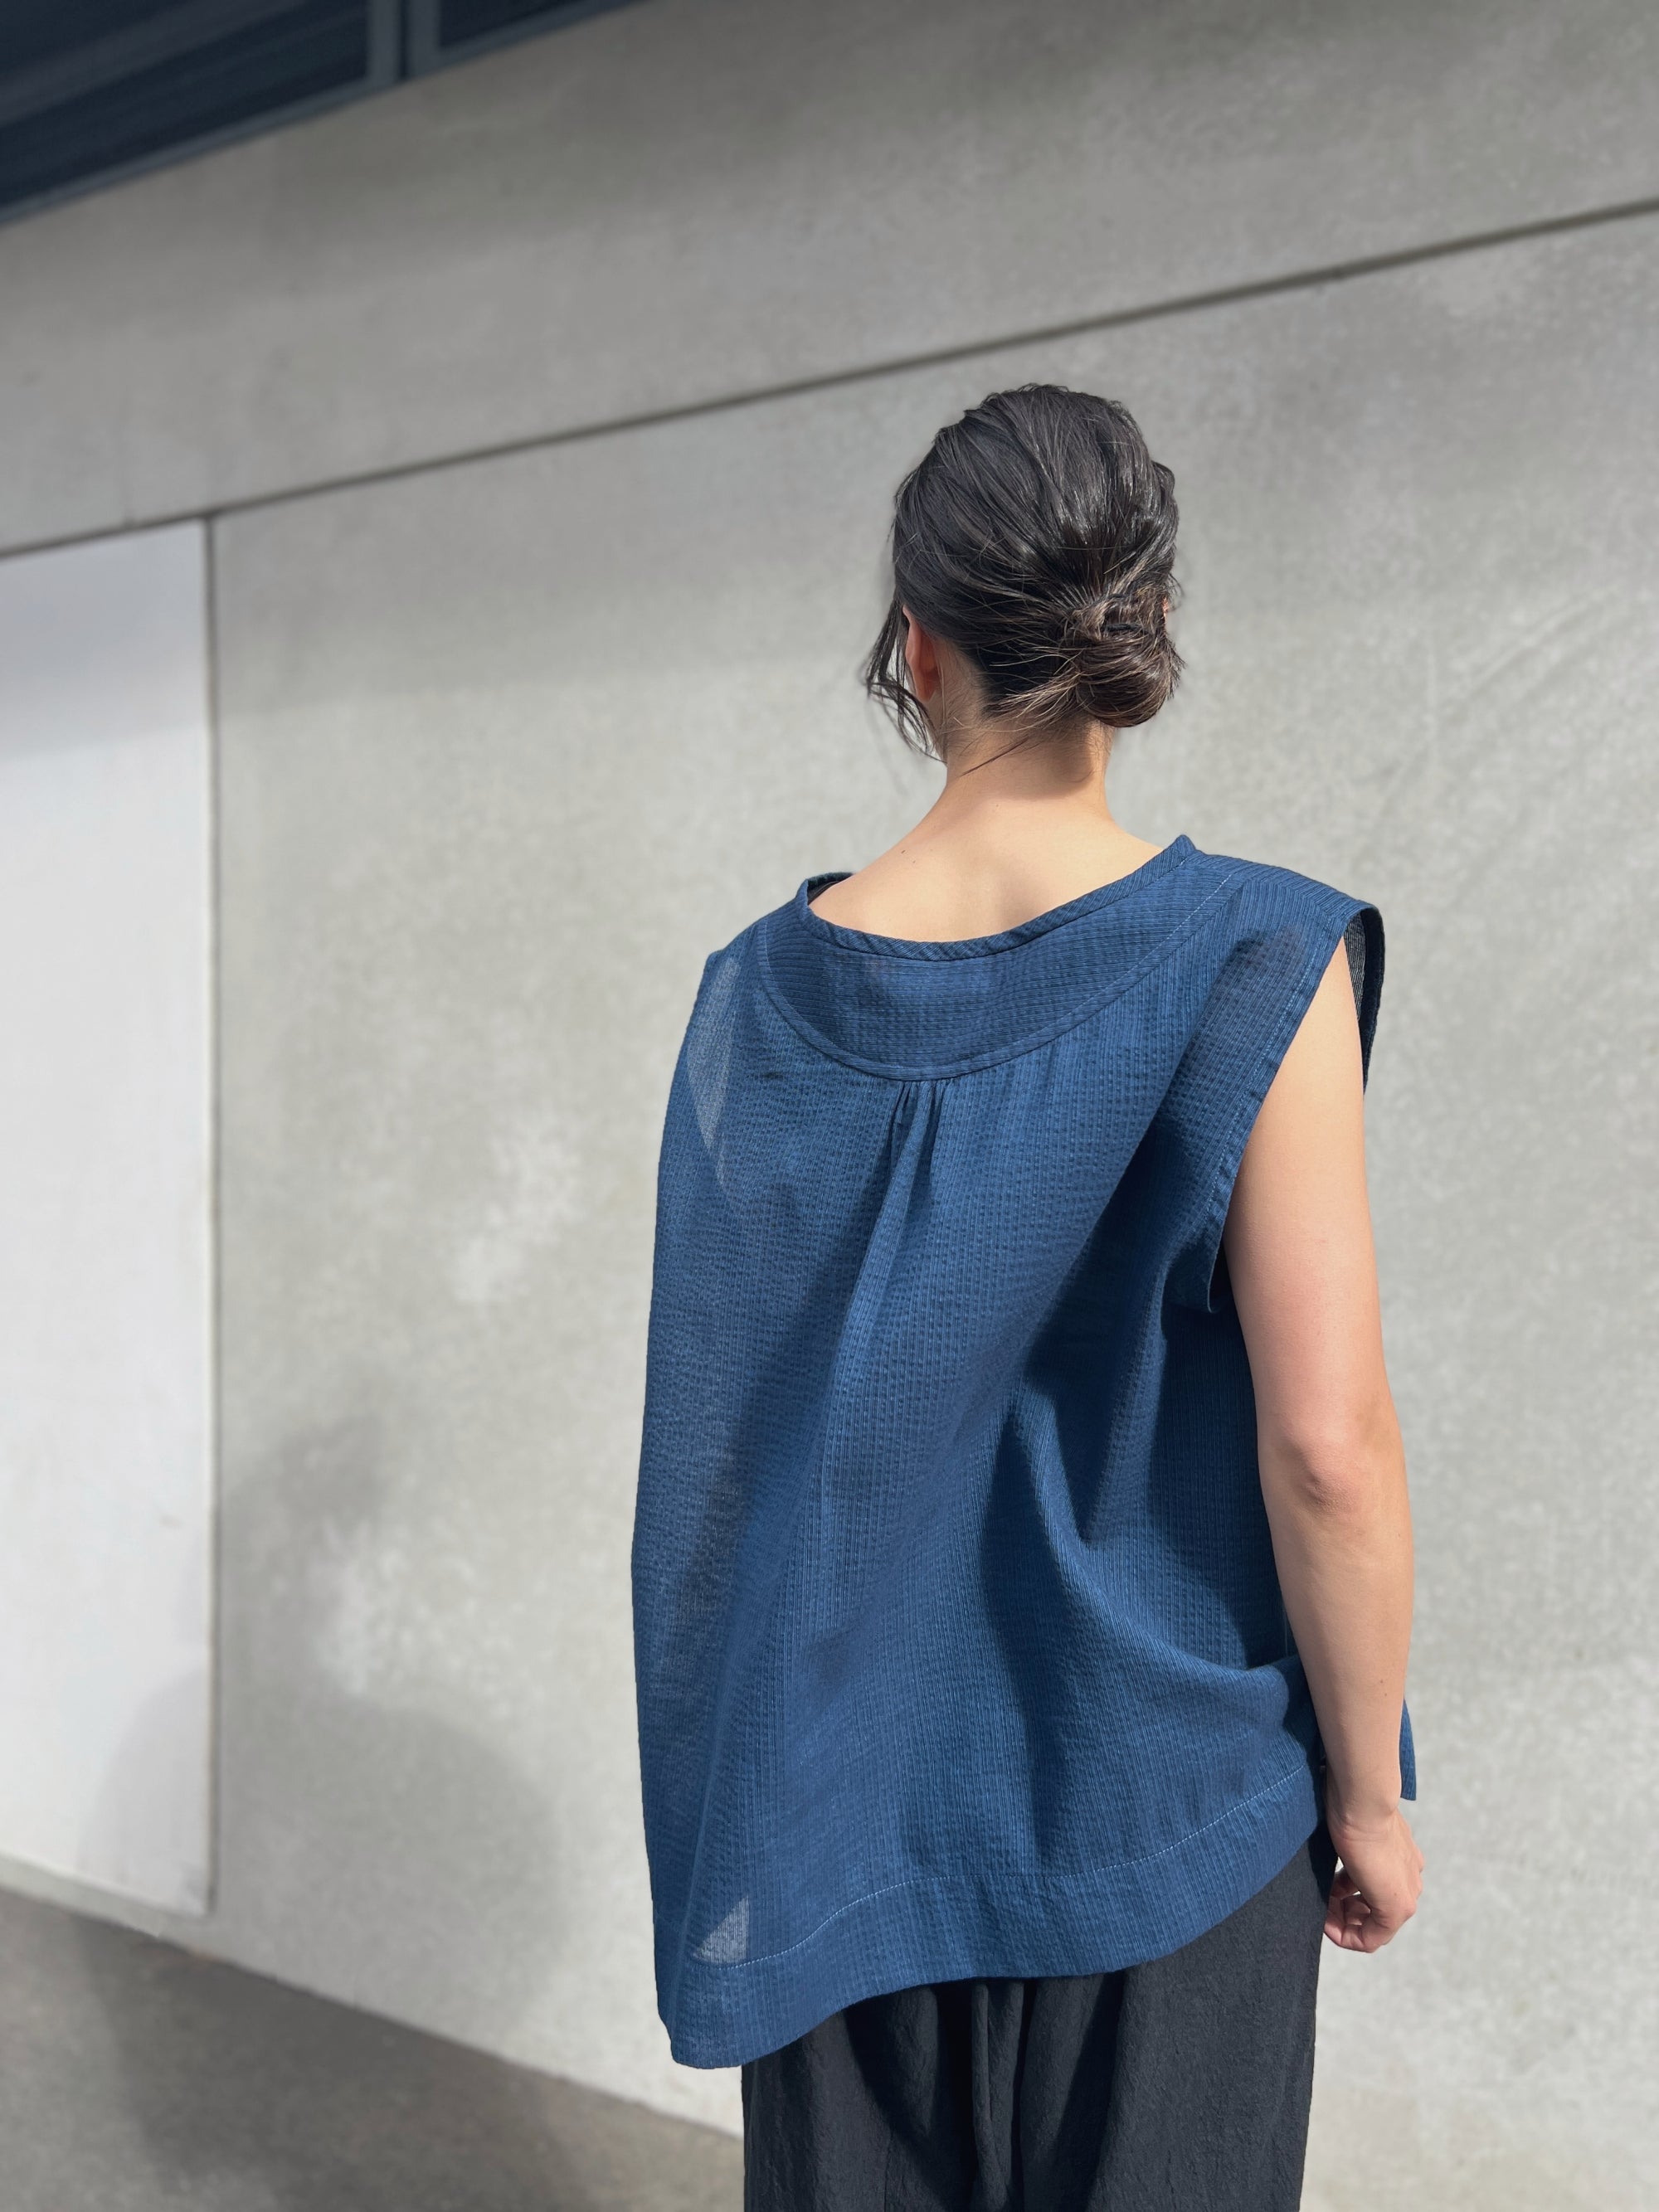 LJ struthers : loose weave cotton tunic